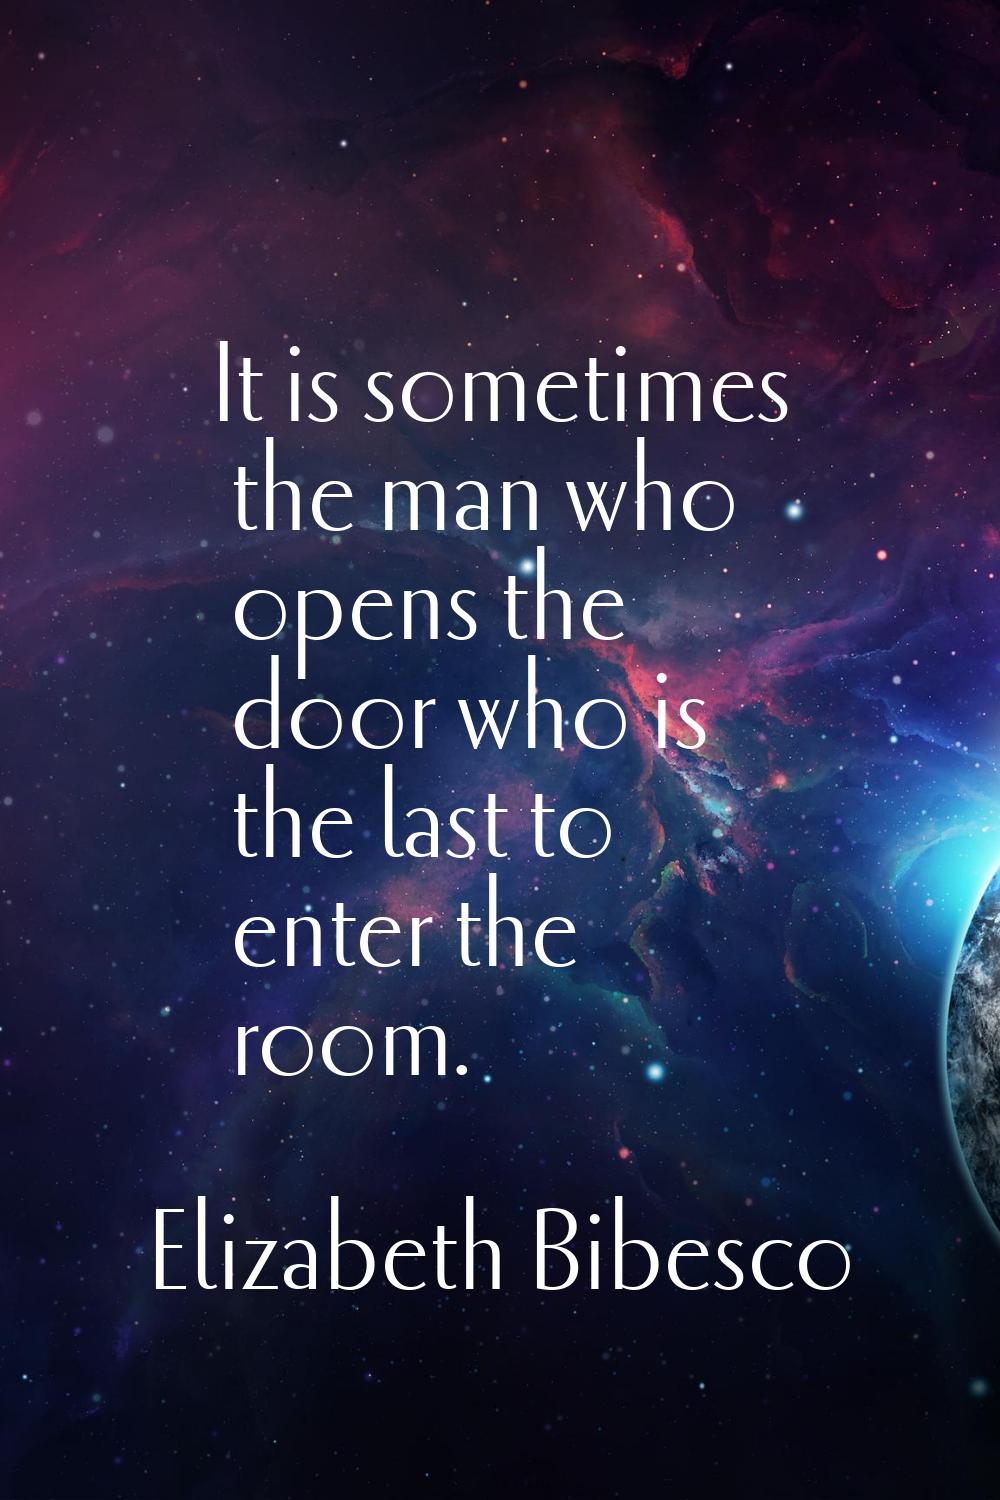 It is sometimes the man who opens the door who is the last to enter the room.